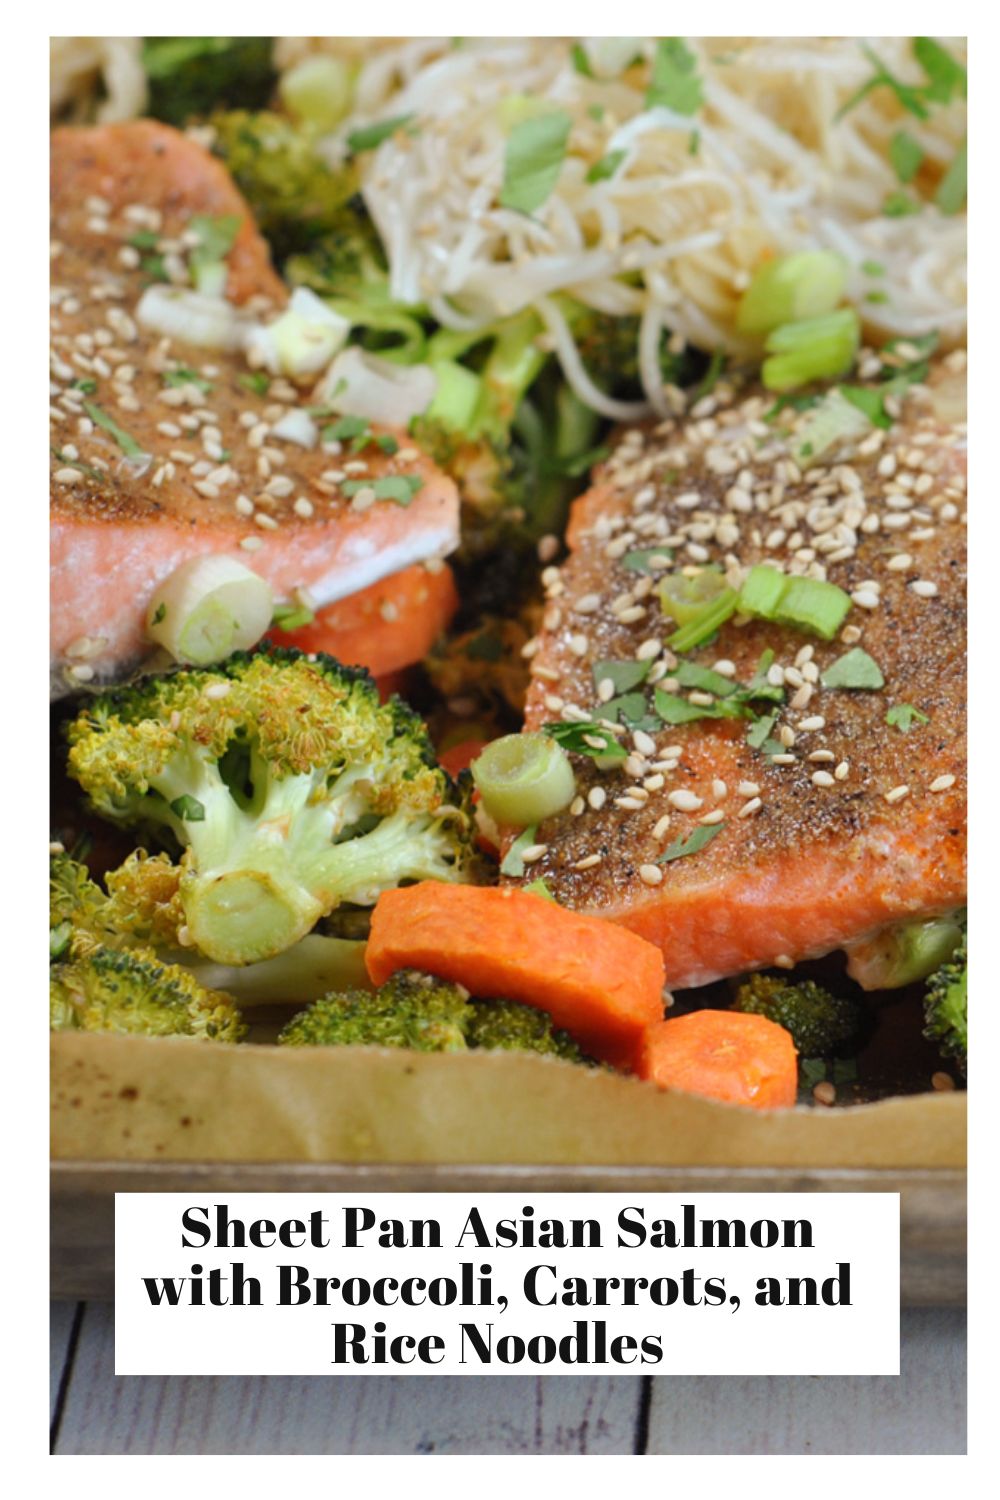 Sheet Pan Asian Salmon with Broccoli, Carrots, and Rice Noodles via @preventionrd